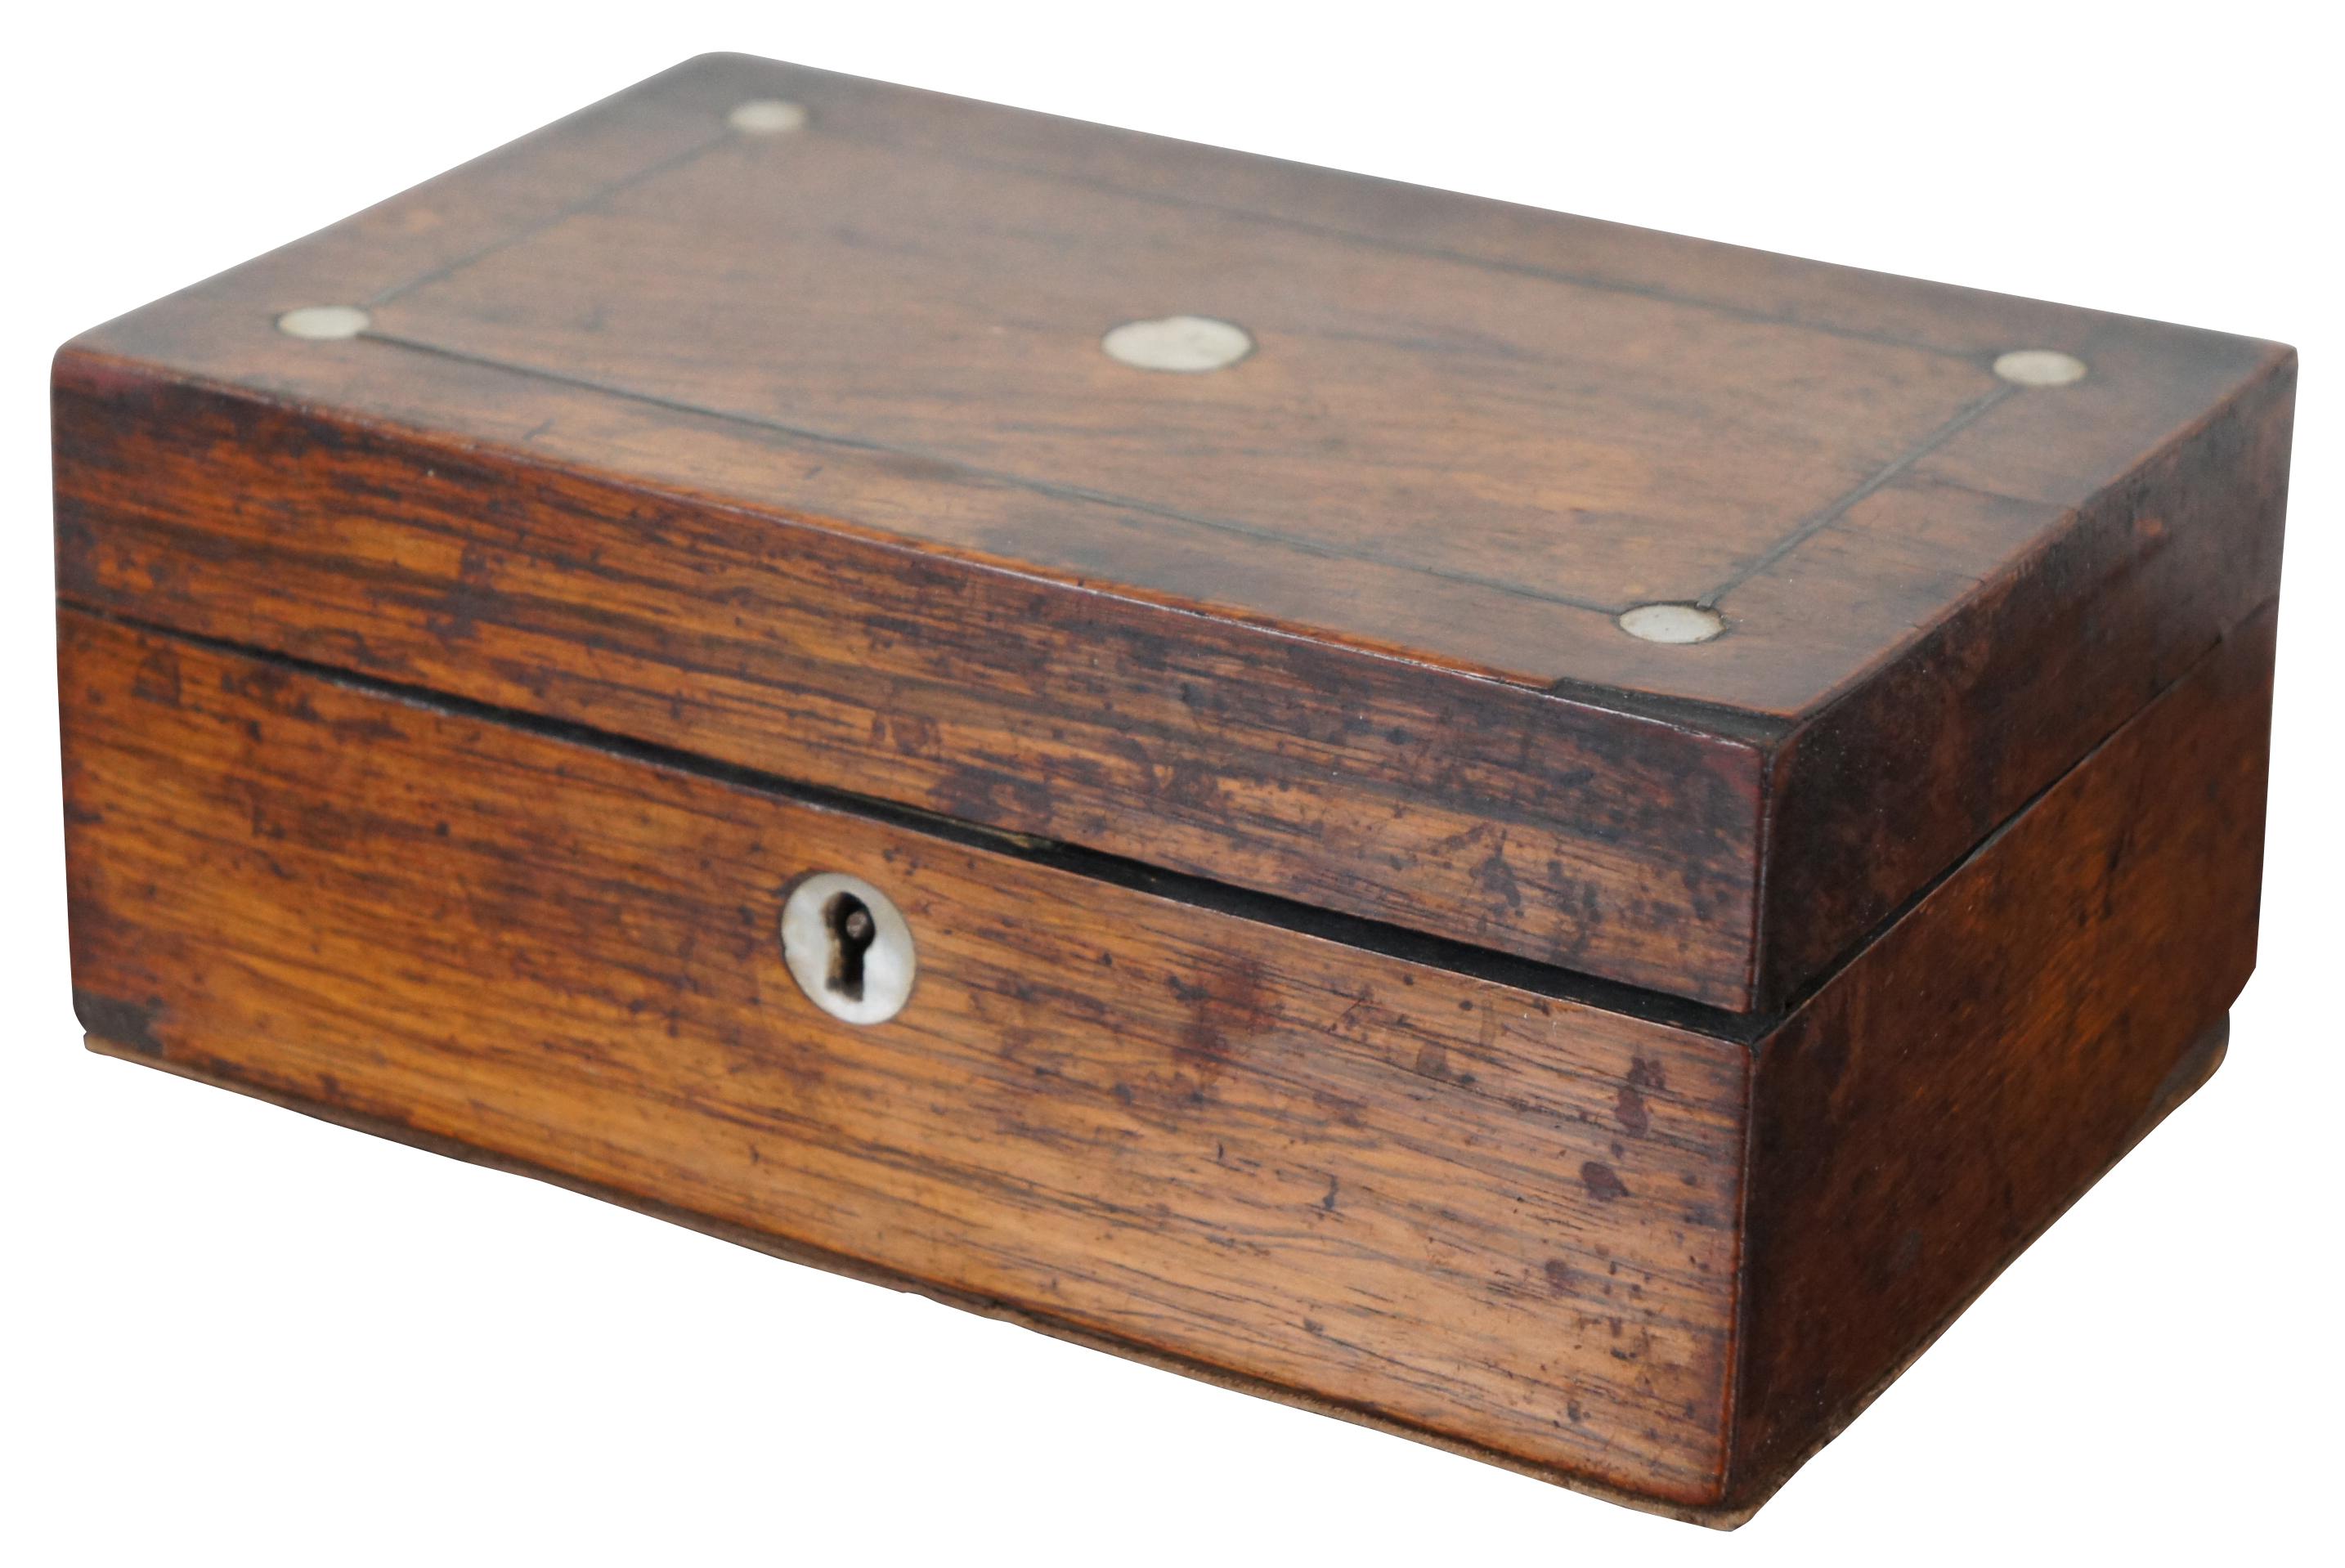 Antique English Ewardian oak trinket or keepsake box with inlaid mother of pearl discs on the lid, red silk lining and added leather padding to interior and base. Measures: 8”.
  